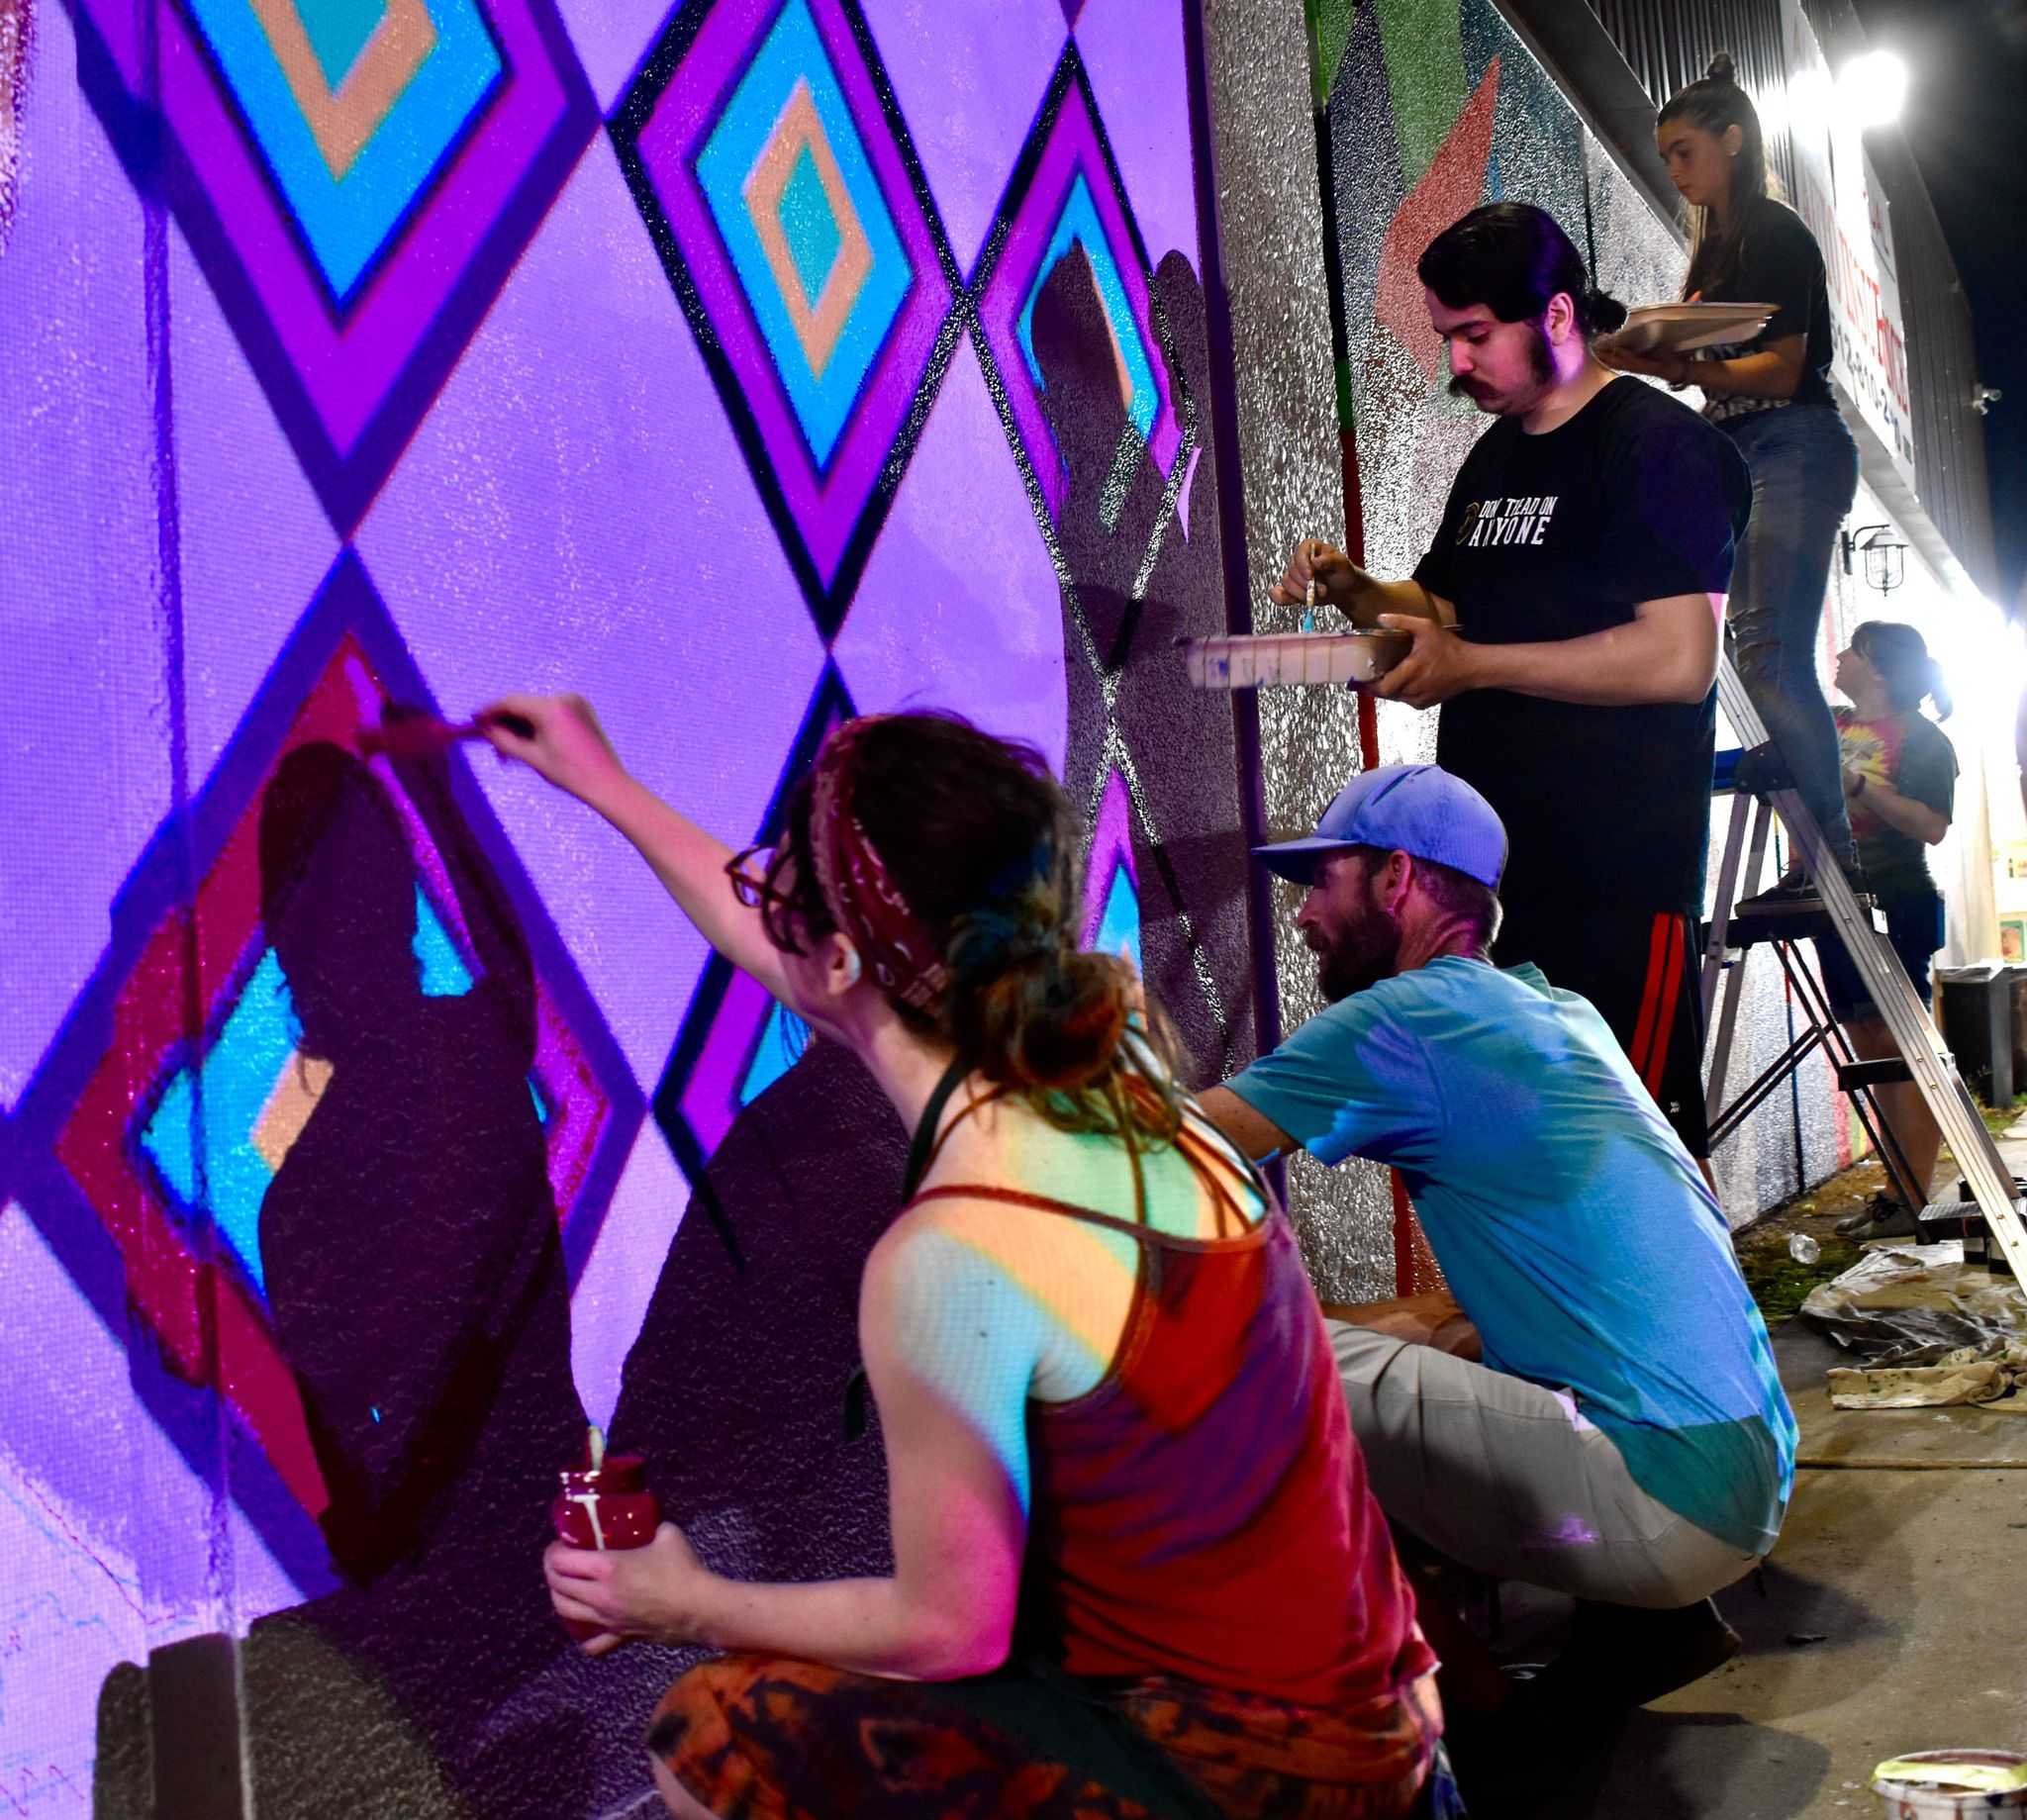 Community+paints+history+through+mural+honoring+local+Latinx+leaders+and+activists